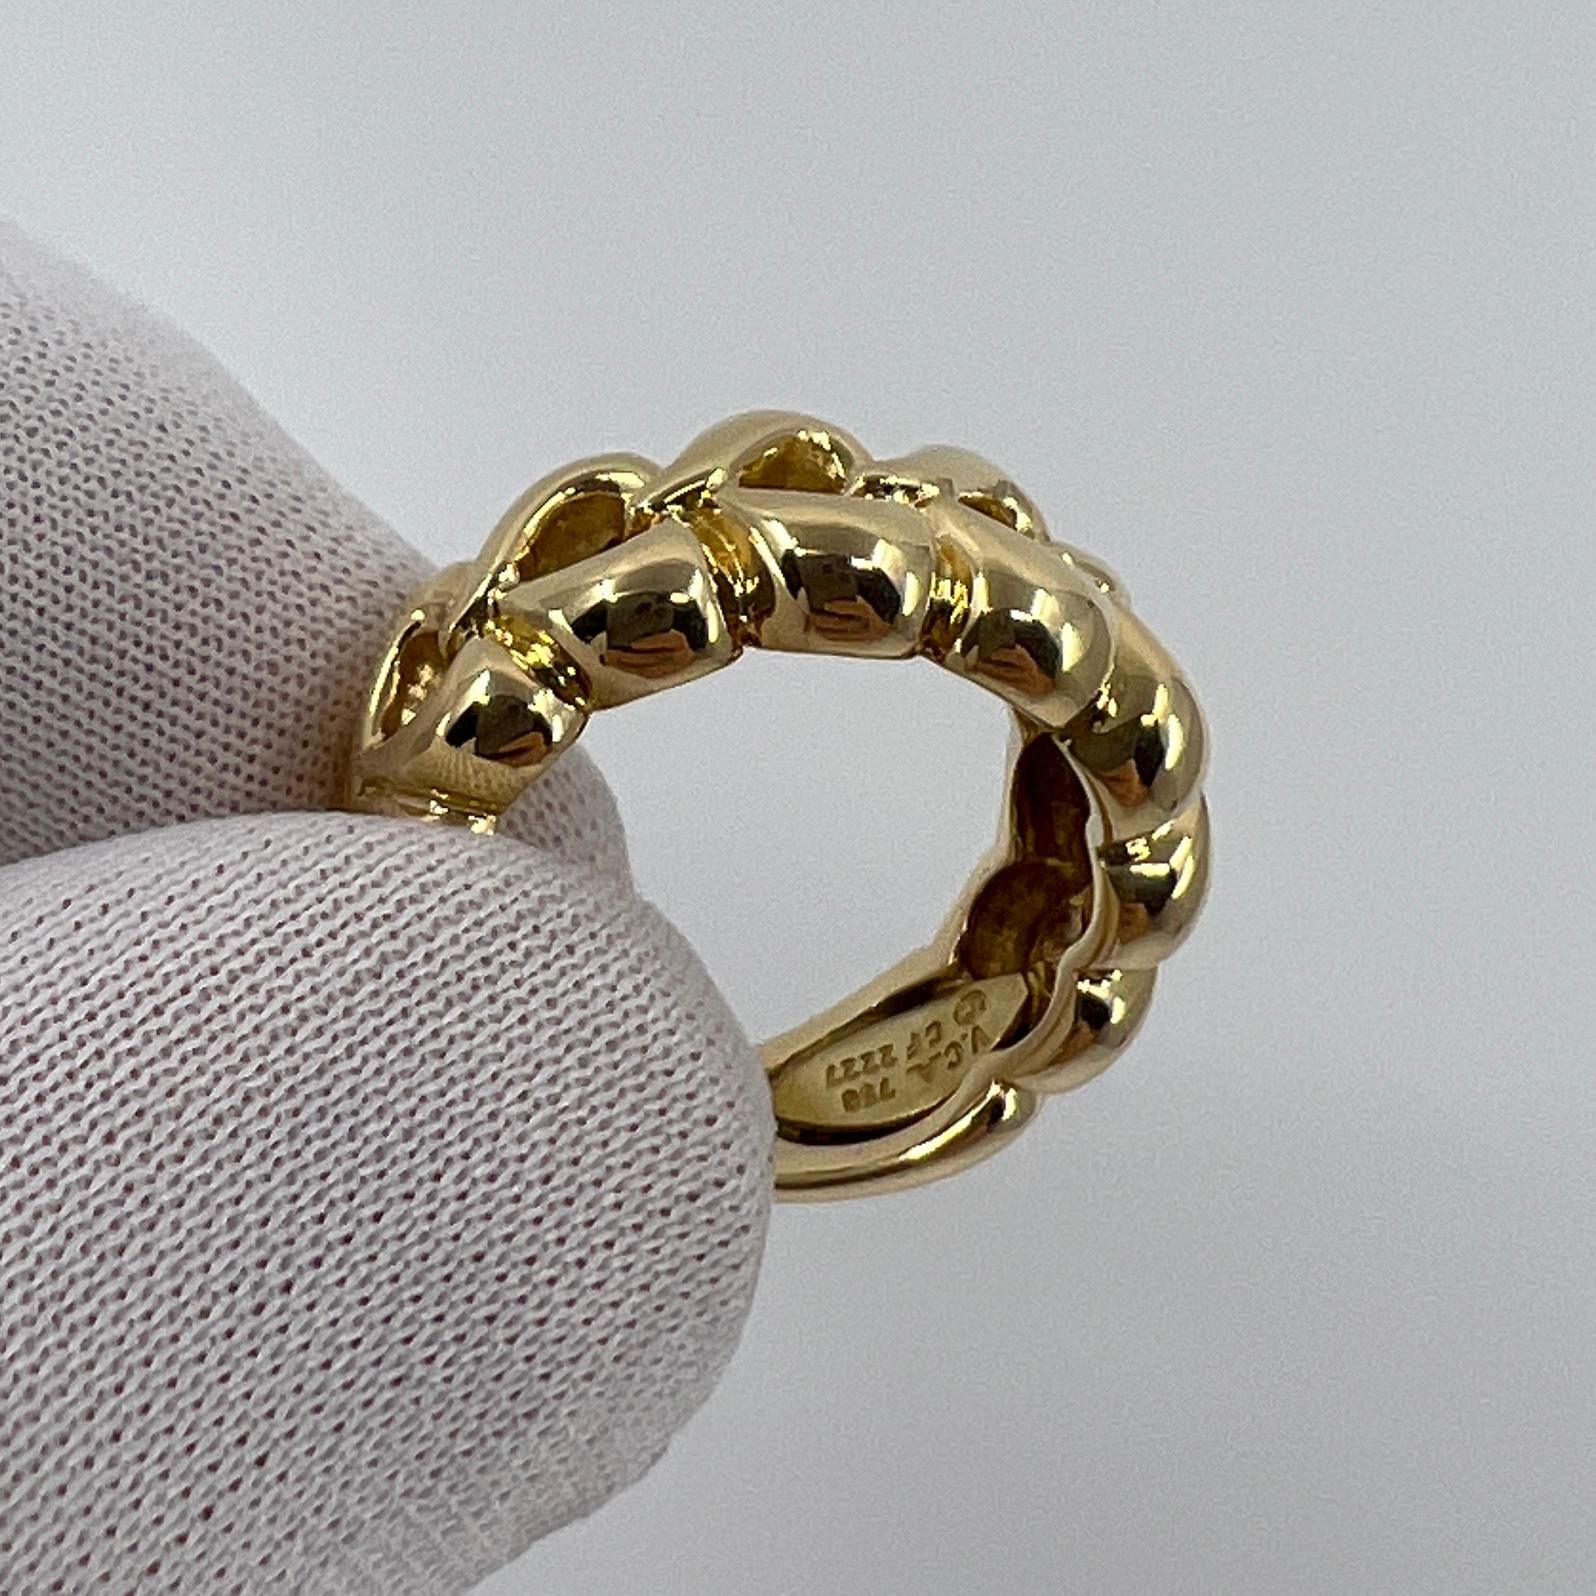 Rare Vintage Van Cleef & Arpels 18k Yellow Gold Open Heart Band Ring with Box 6